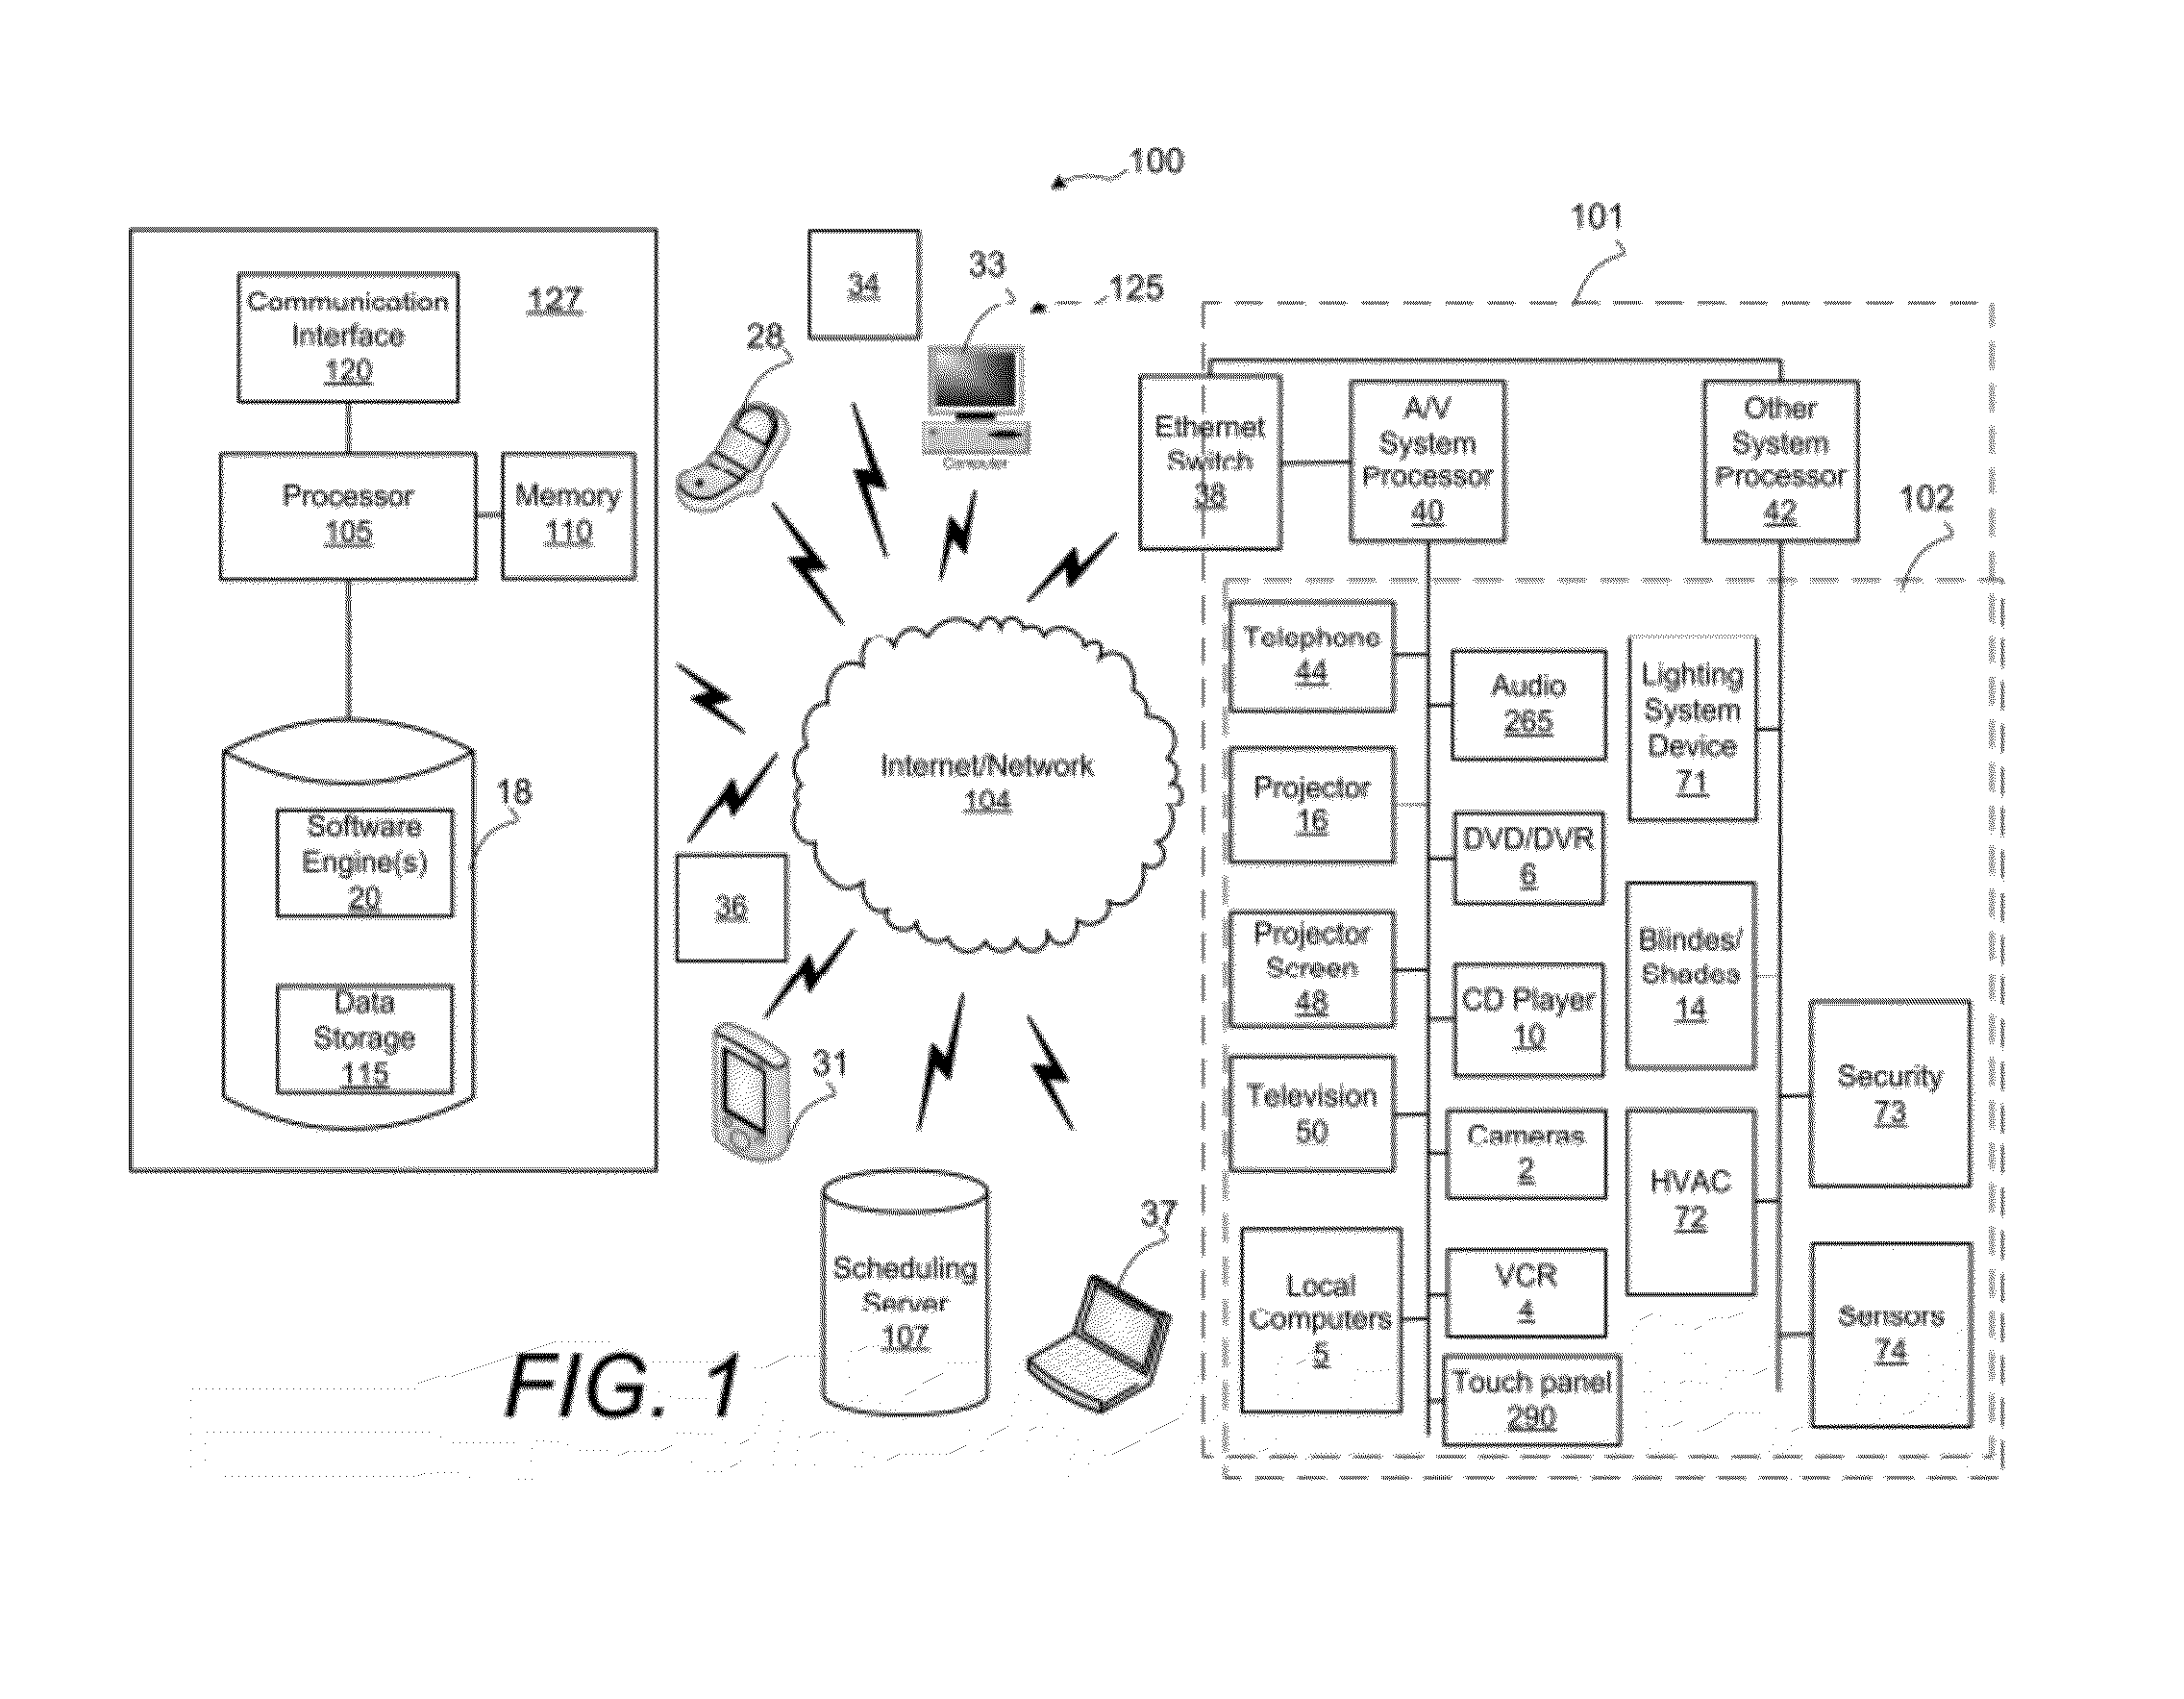 Meeting Management System Including Automated Equipment Setup